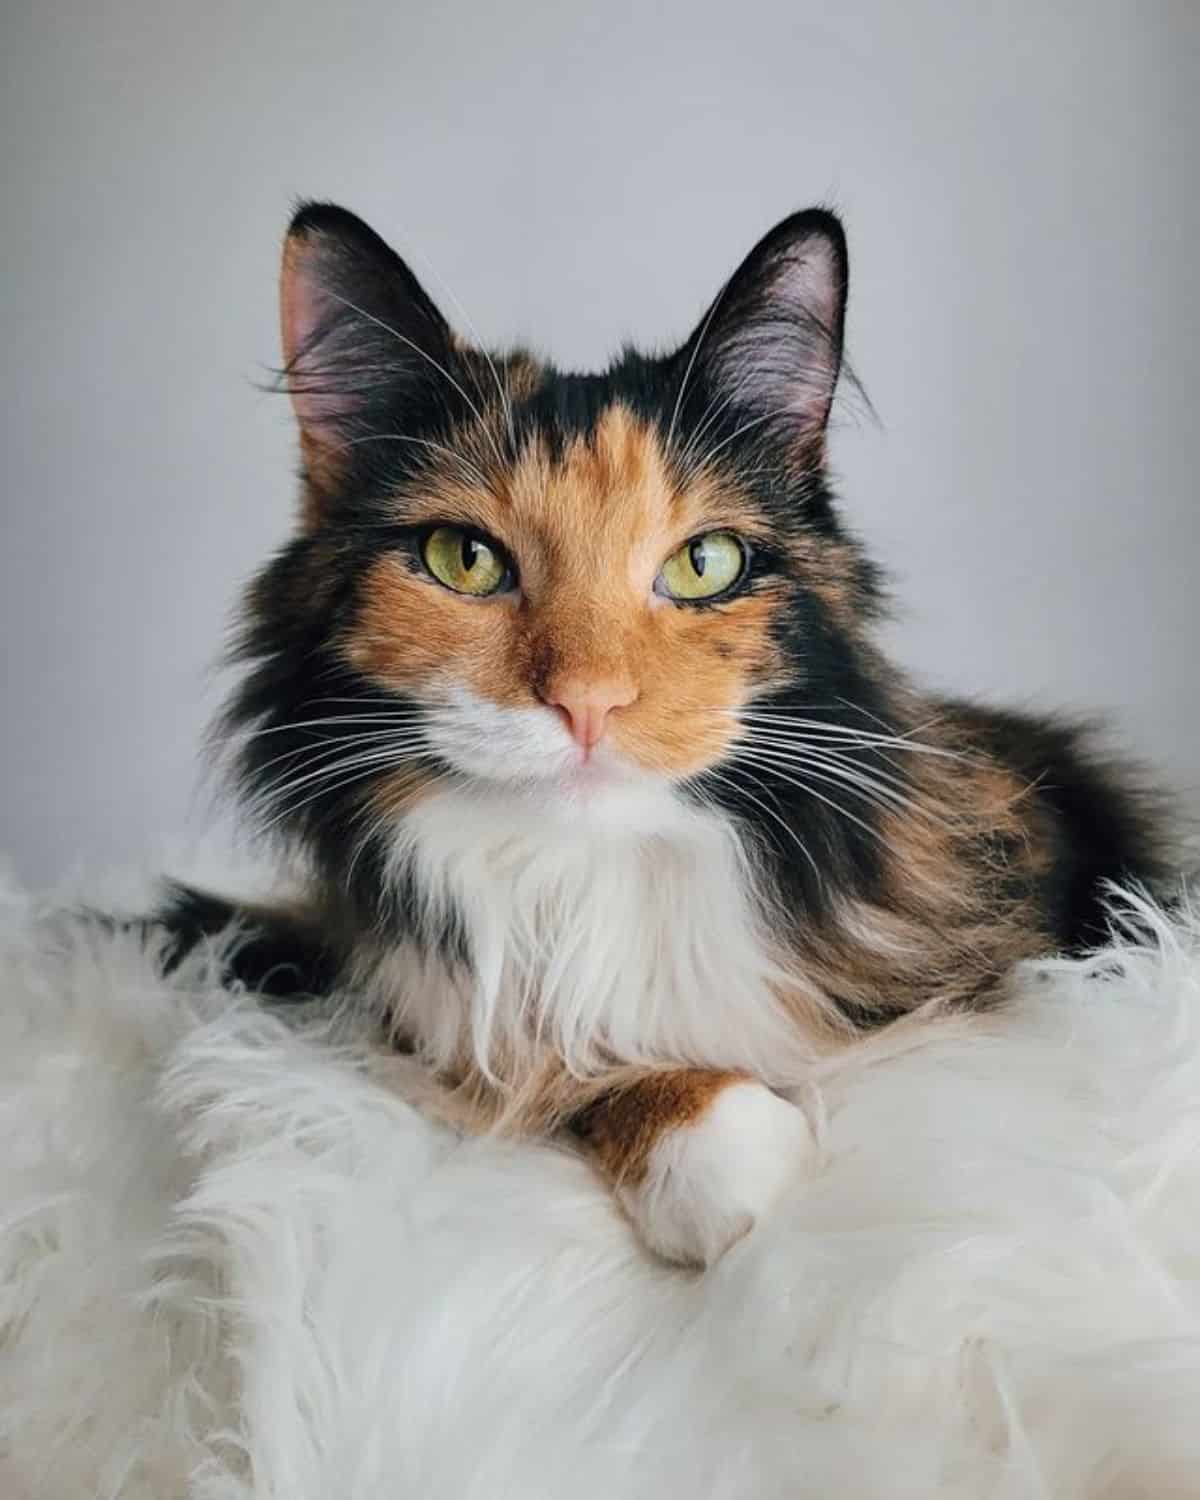 A beautiful calico maine coon lying on a fluffy rug.